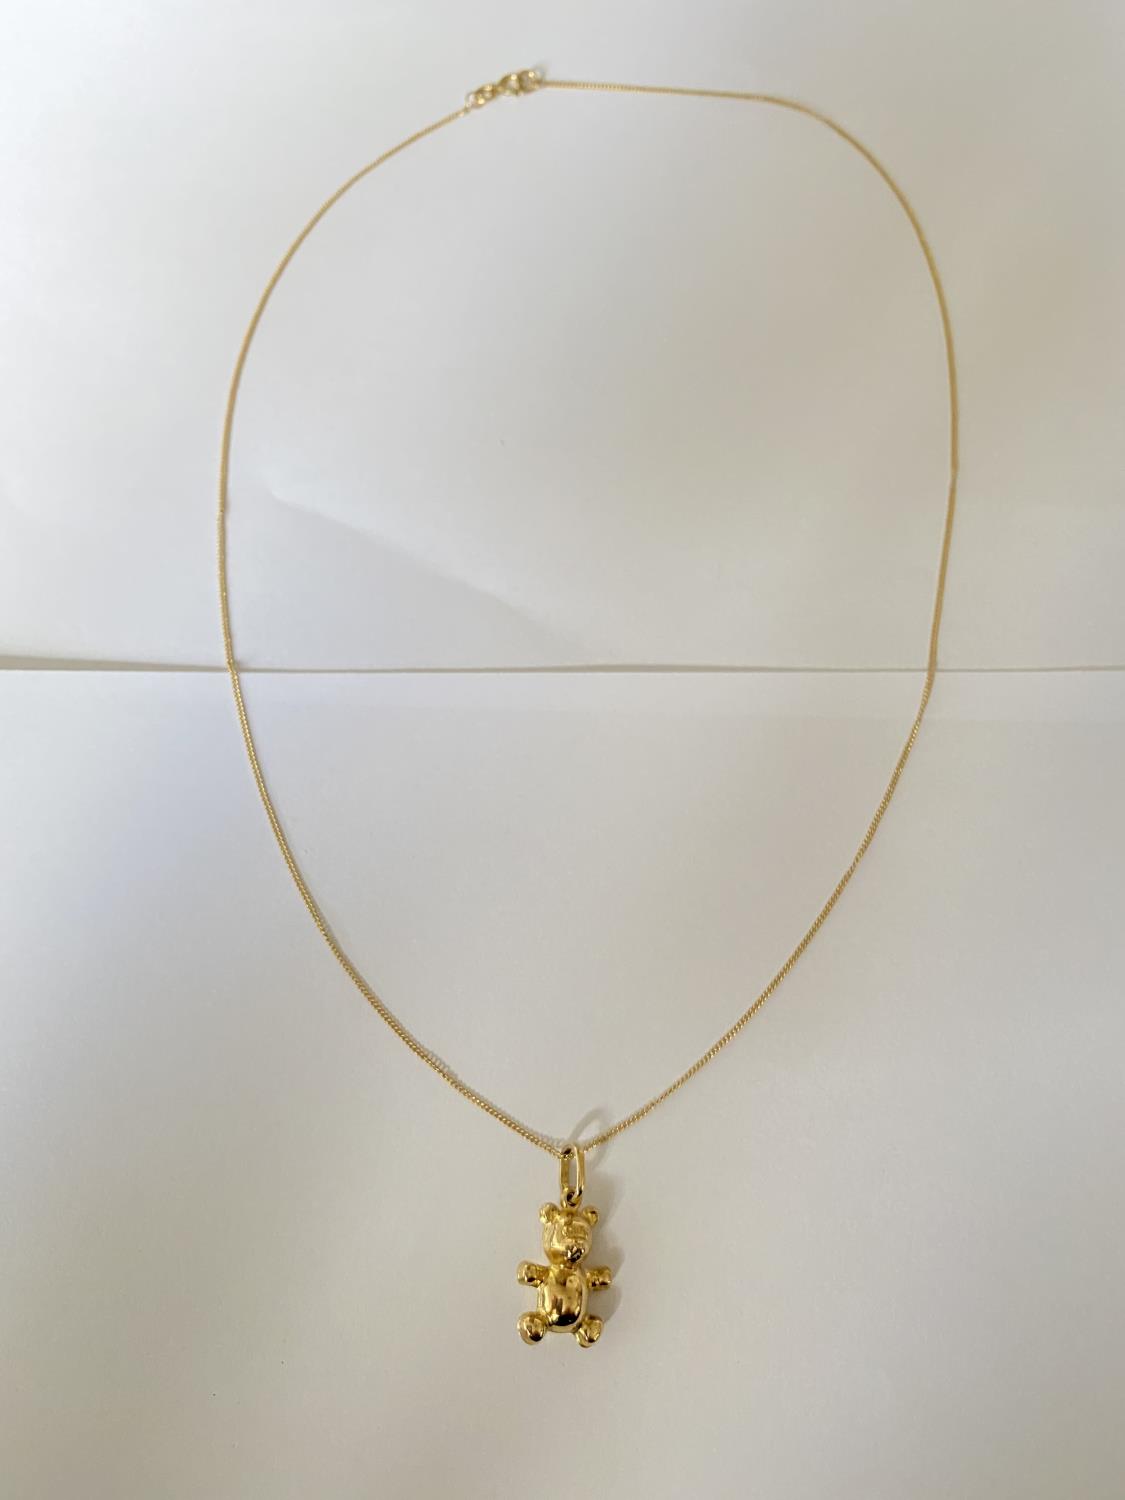 A 9 CARAT GOLD TEDDY BEAR PENDANT AND NECKLACE CHAIN. WEIGHT 2.2 GRAMS, CHAIN 42 CM